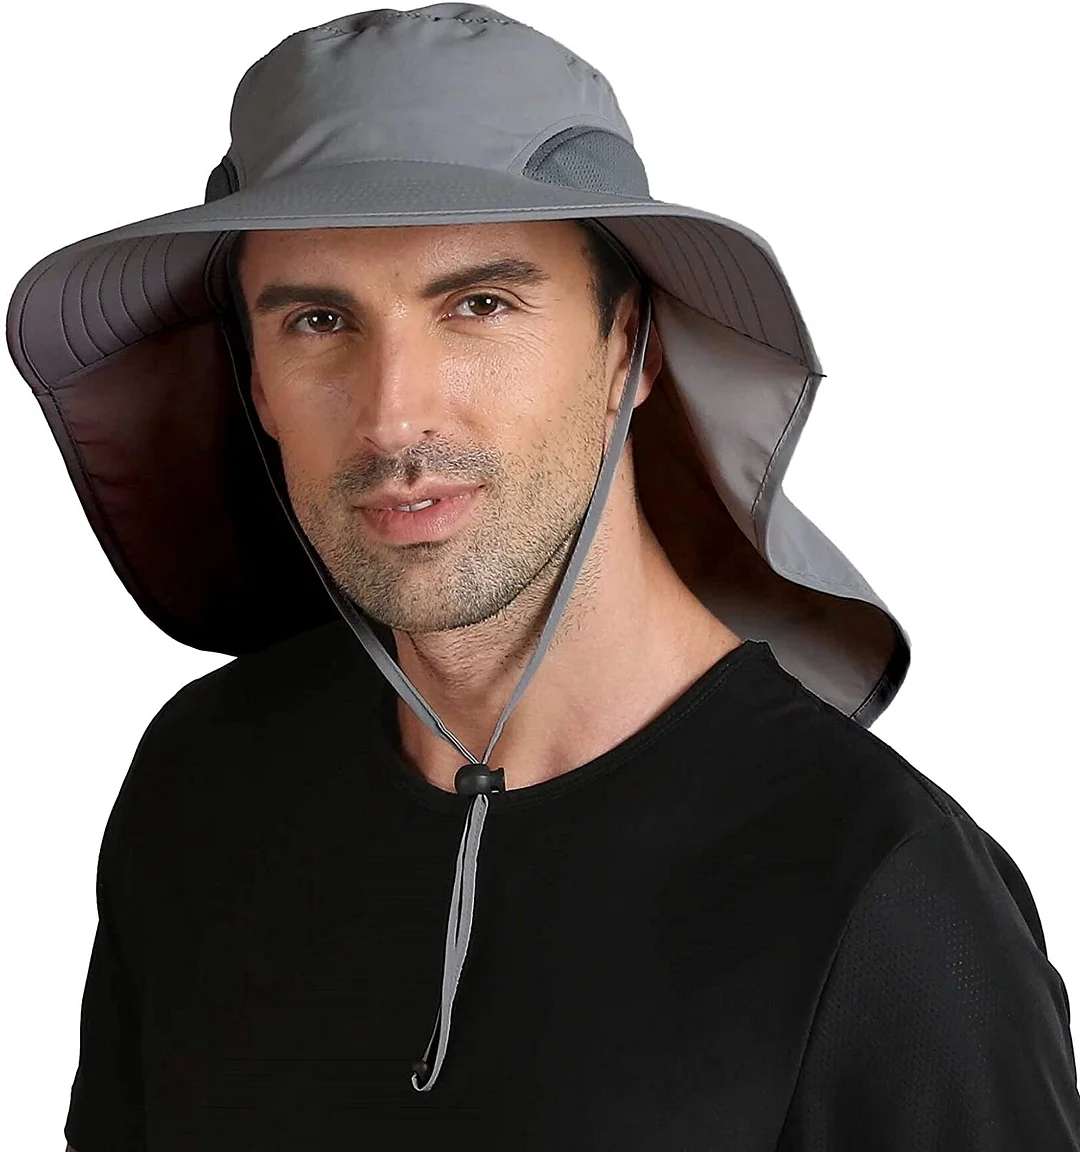 Outdoor Large Brim Fishing Hat with Neck Cover UPF 50+ Mesh Sun Hats